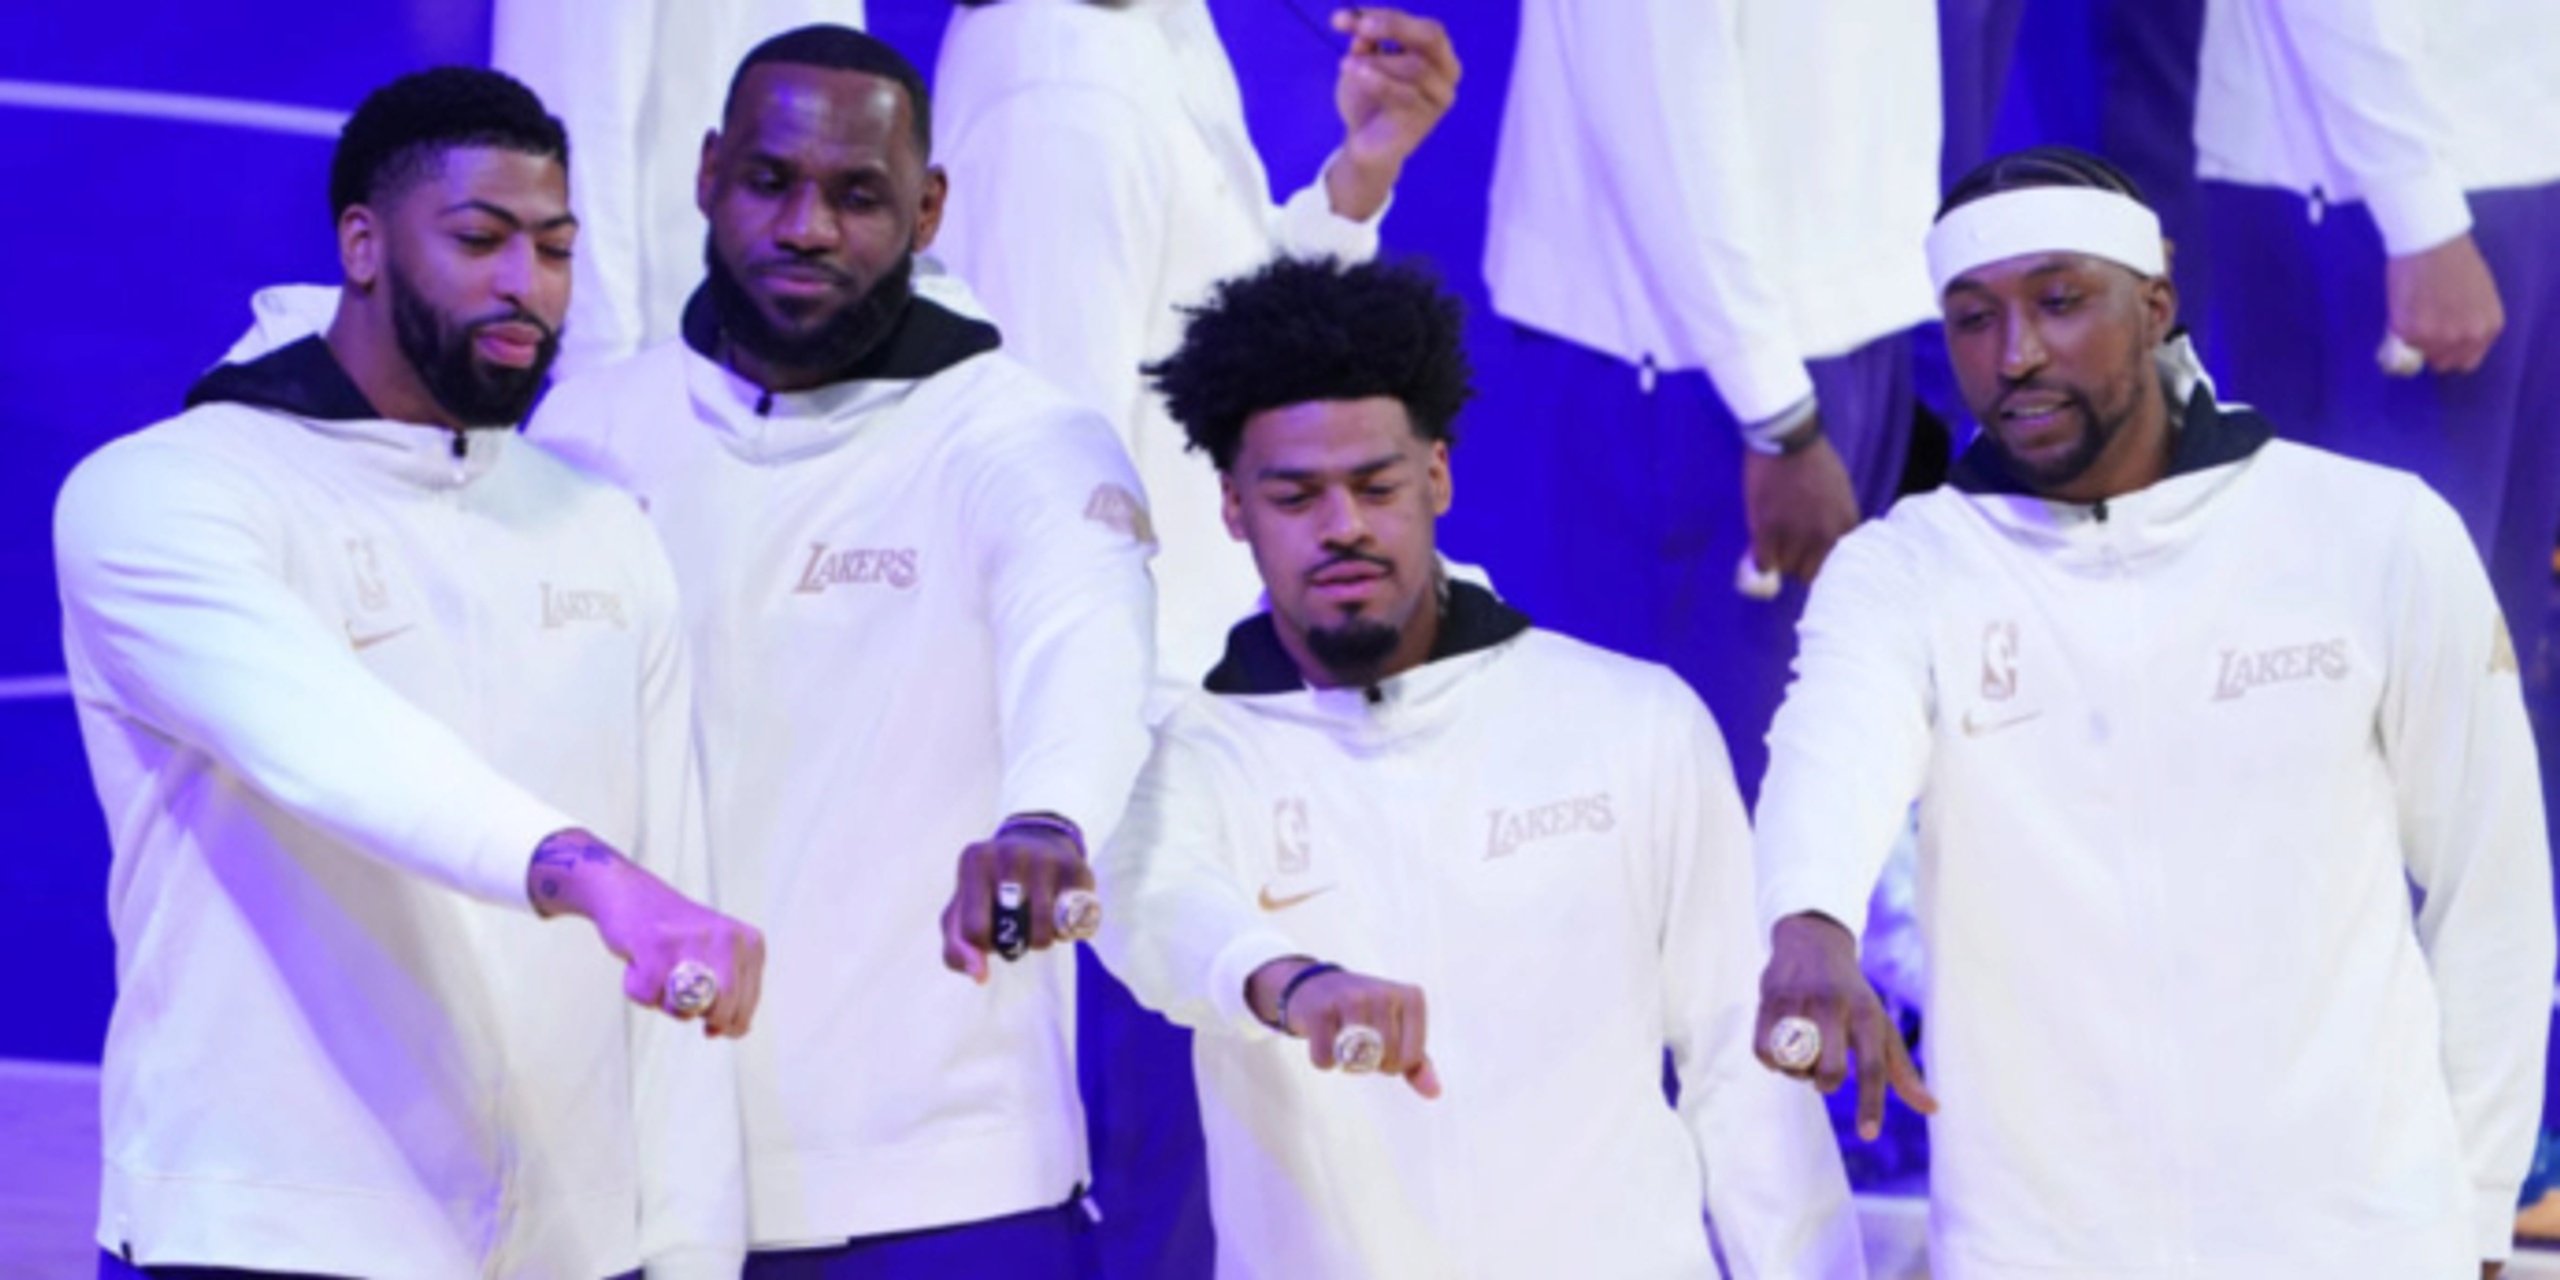 Los Angeles Lakers awarded 2020 championship rings